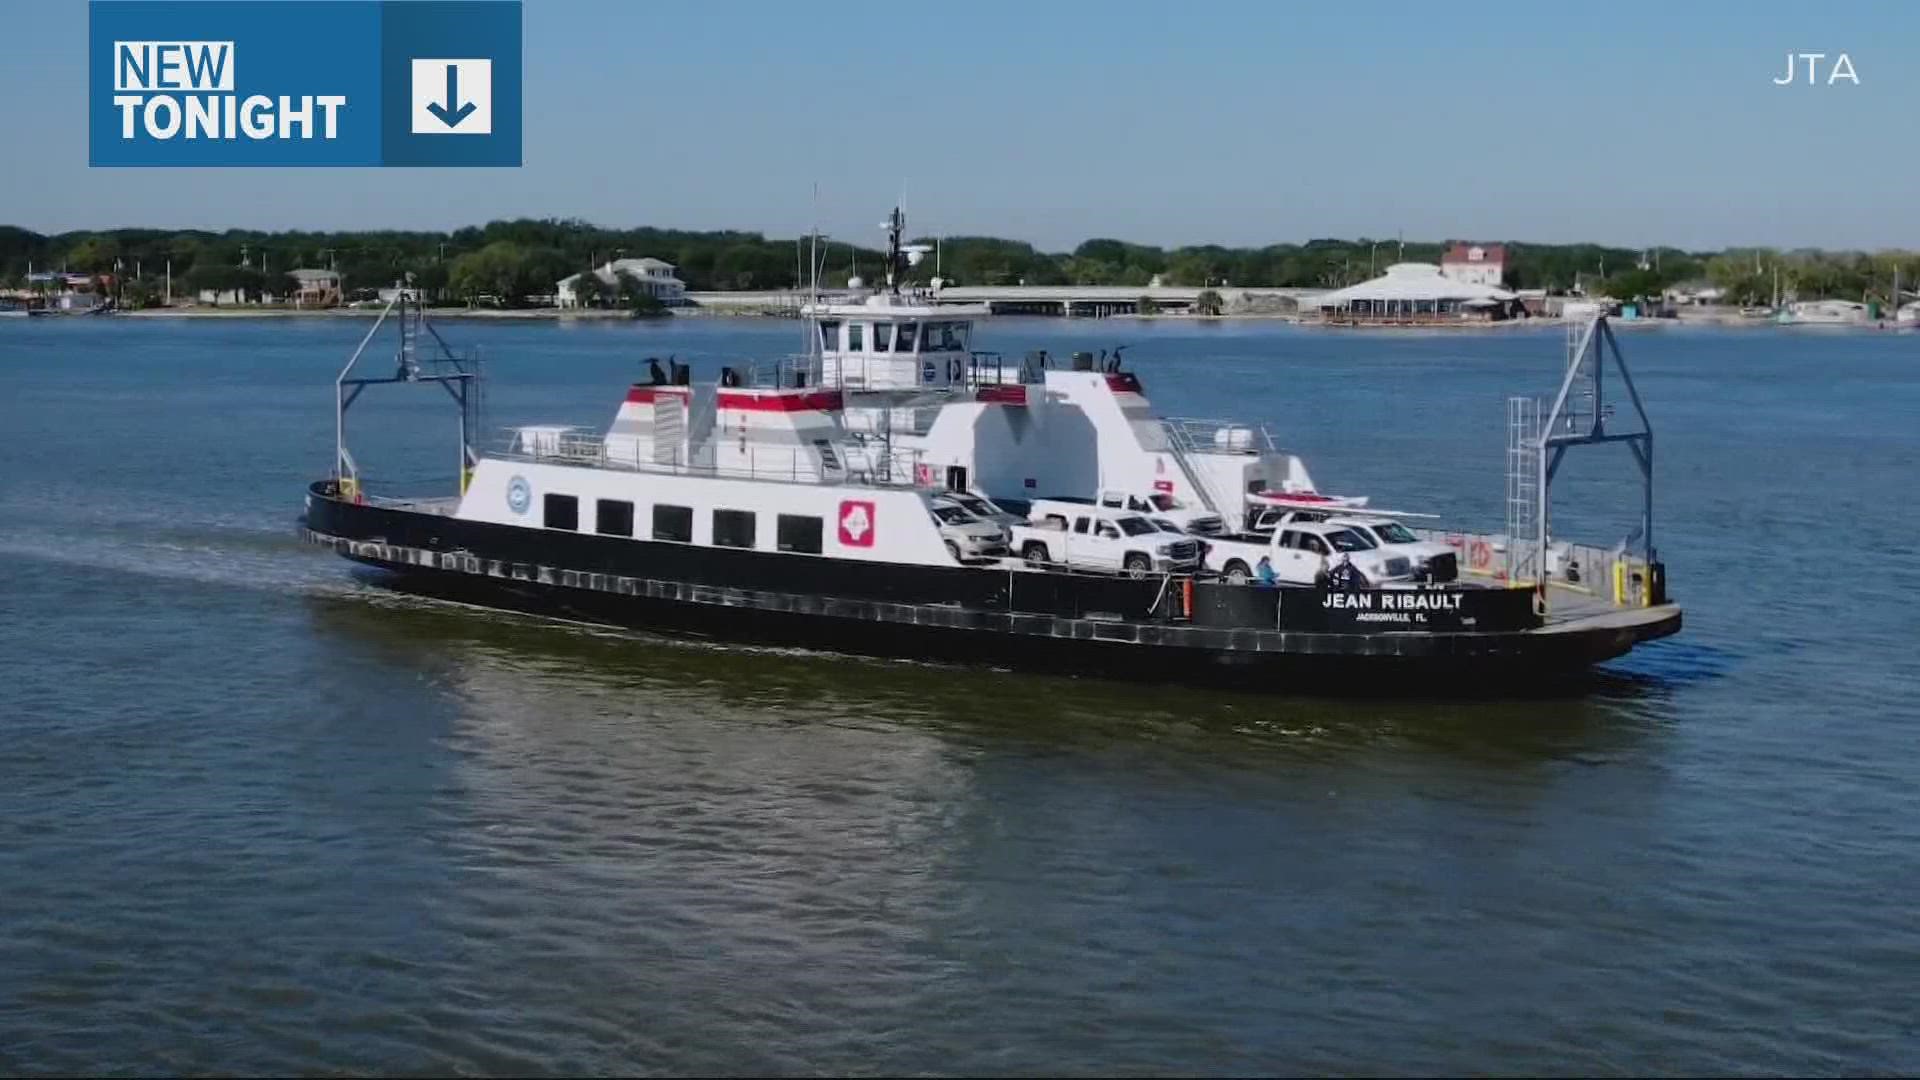 JTA will suspend St. Johns River Ferry service from January 14 to April 1, 2023 for routine vessel maintenance required by the U.S. Coast Guard.